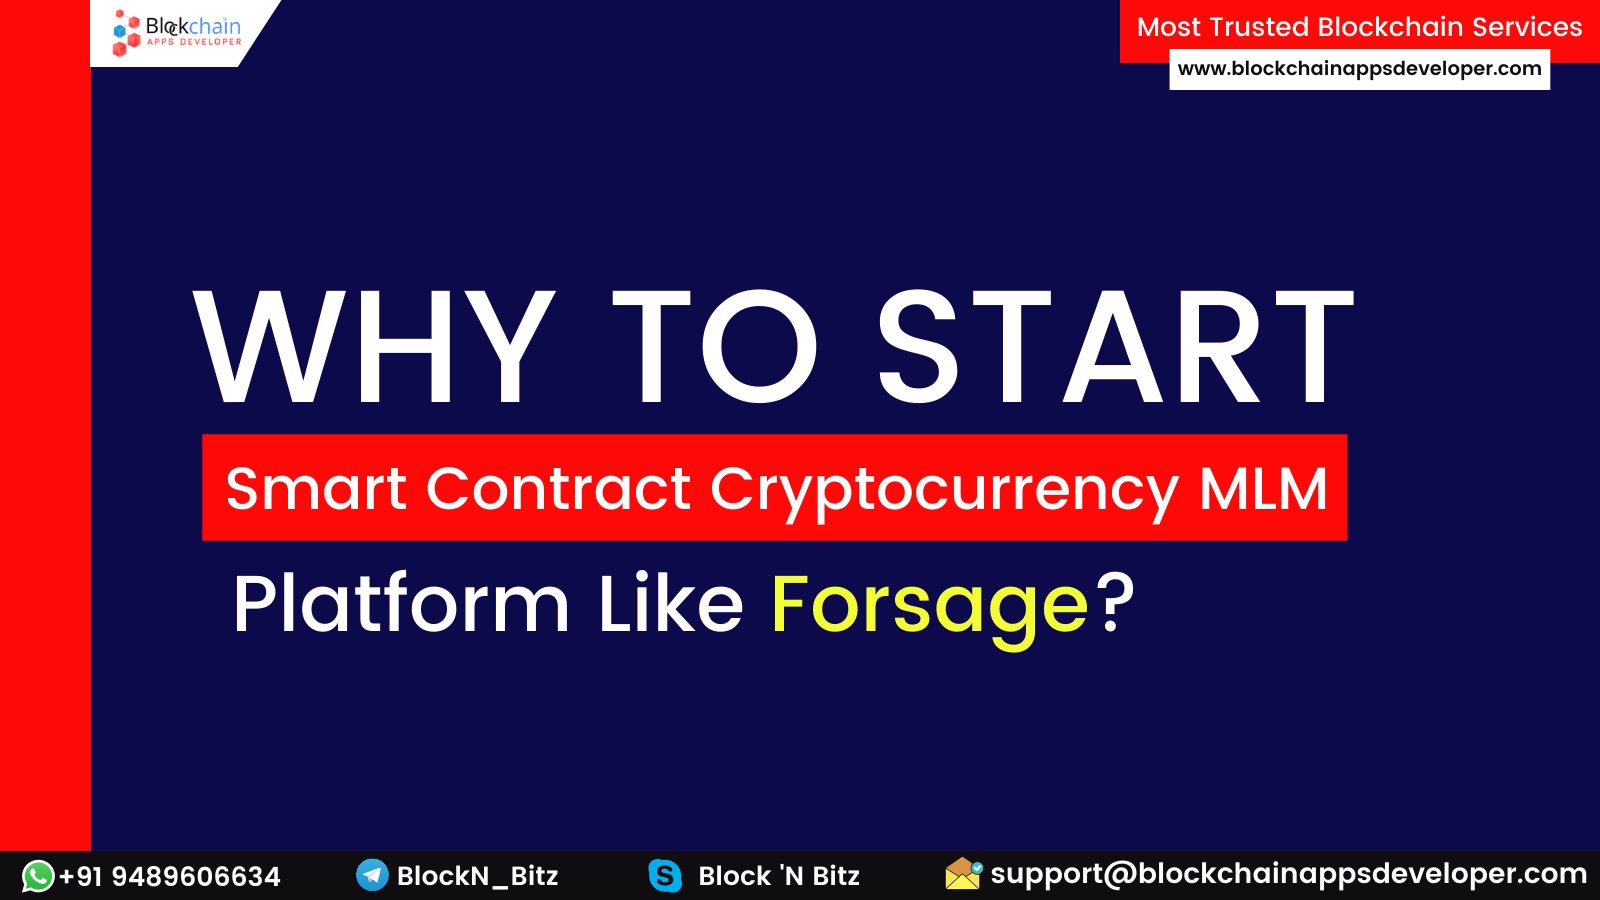 WHY TO START SMART CONTRACT BASED CRYPTOCURRENCY MLM BUSINESS LIKE FORSAGE?